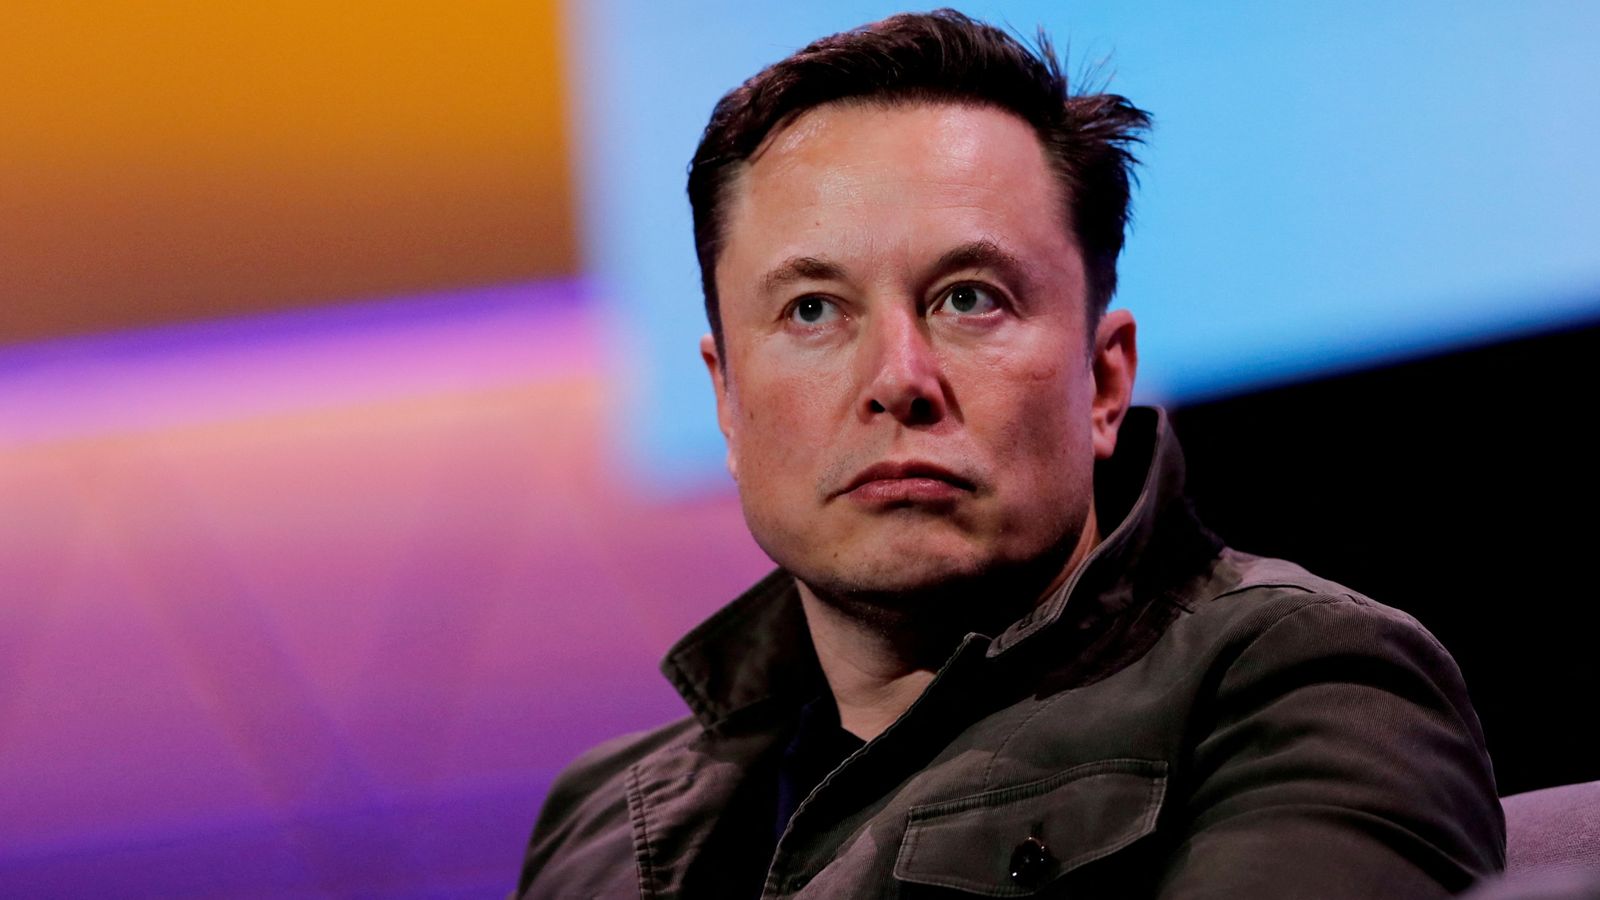 Elon Musk warned by European Union that Twitter will be banned unless he sticks to bloc's digital rules - report